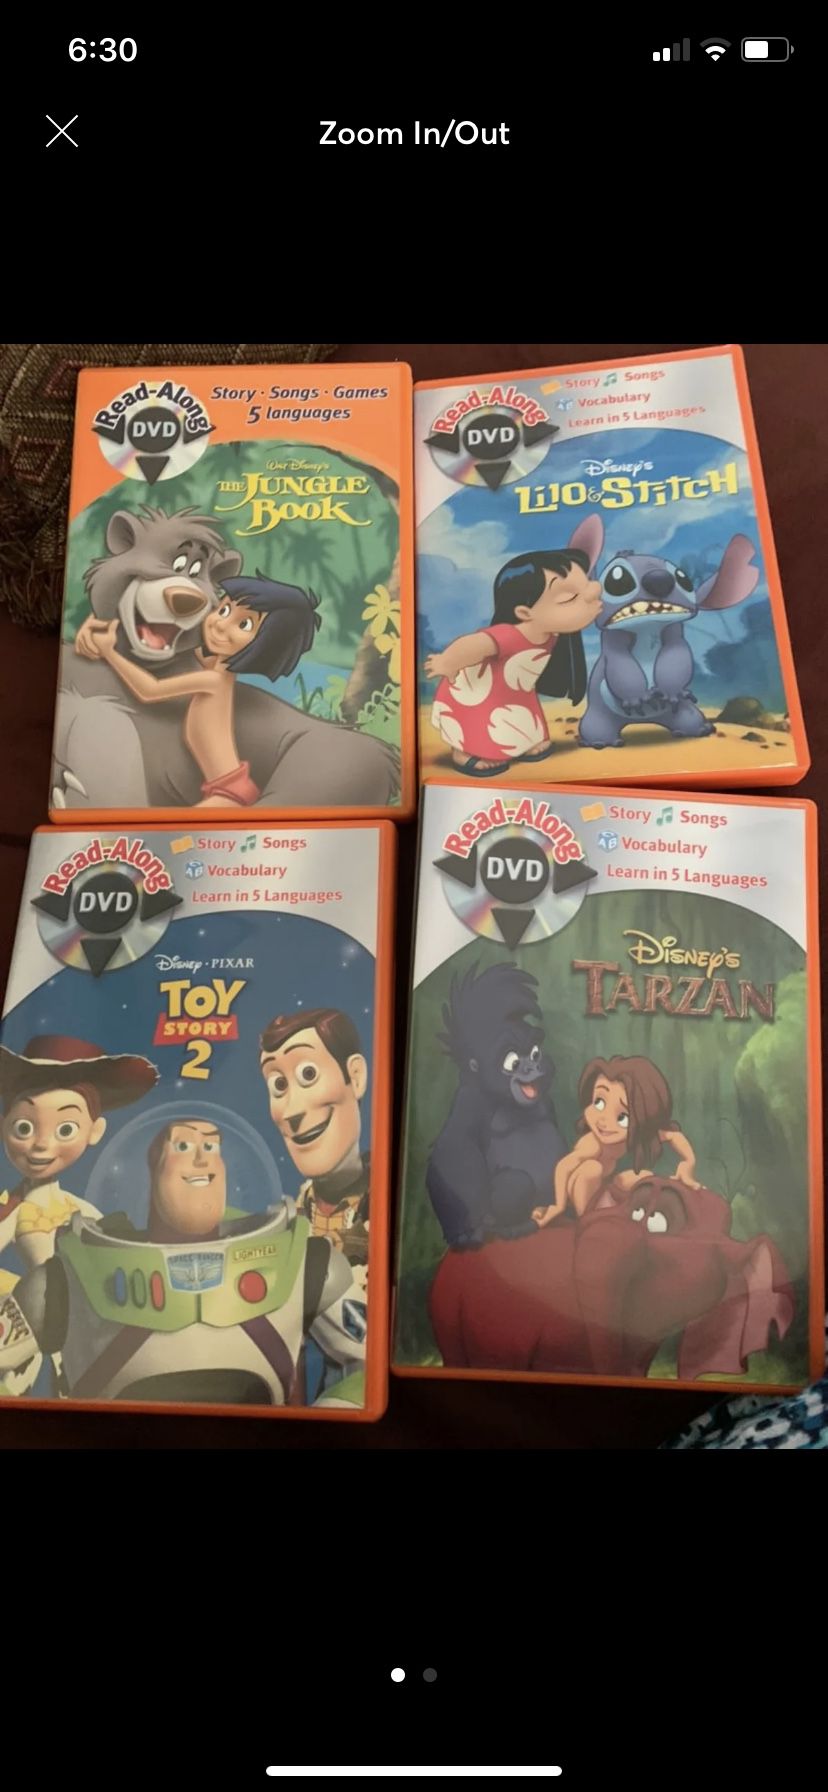 Disney Read Along DVD’s in 5 languages